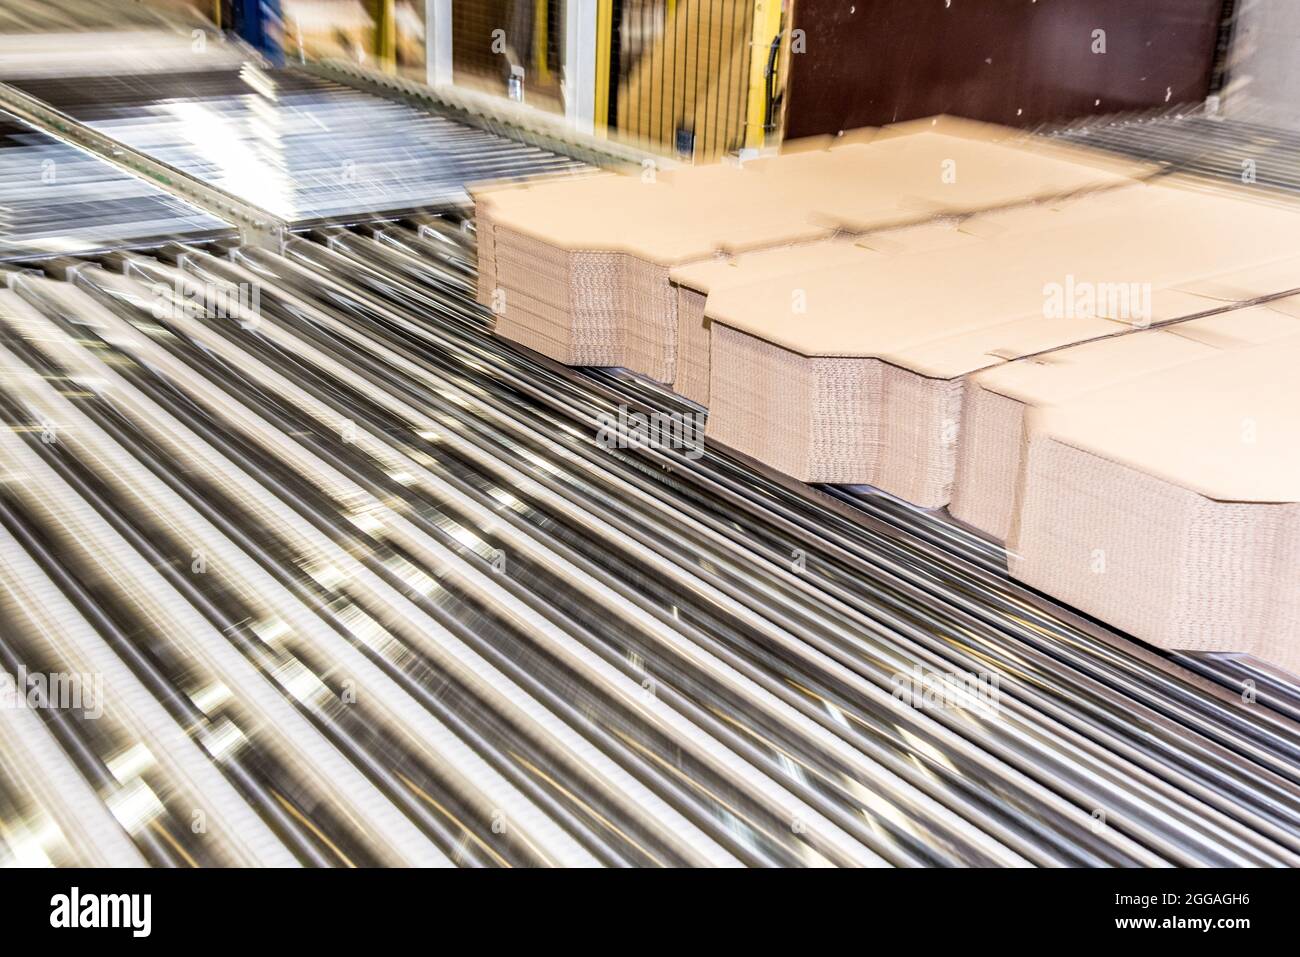 Conveyor belt automation at a corrugated cardboard manufacturing plant Stock Photo